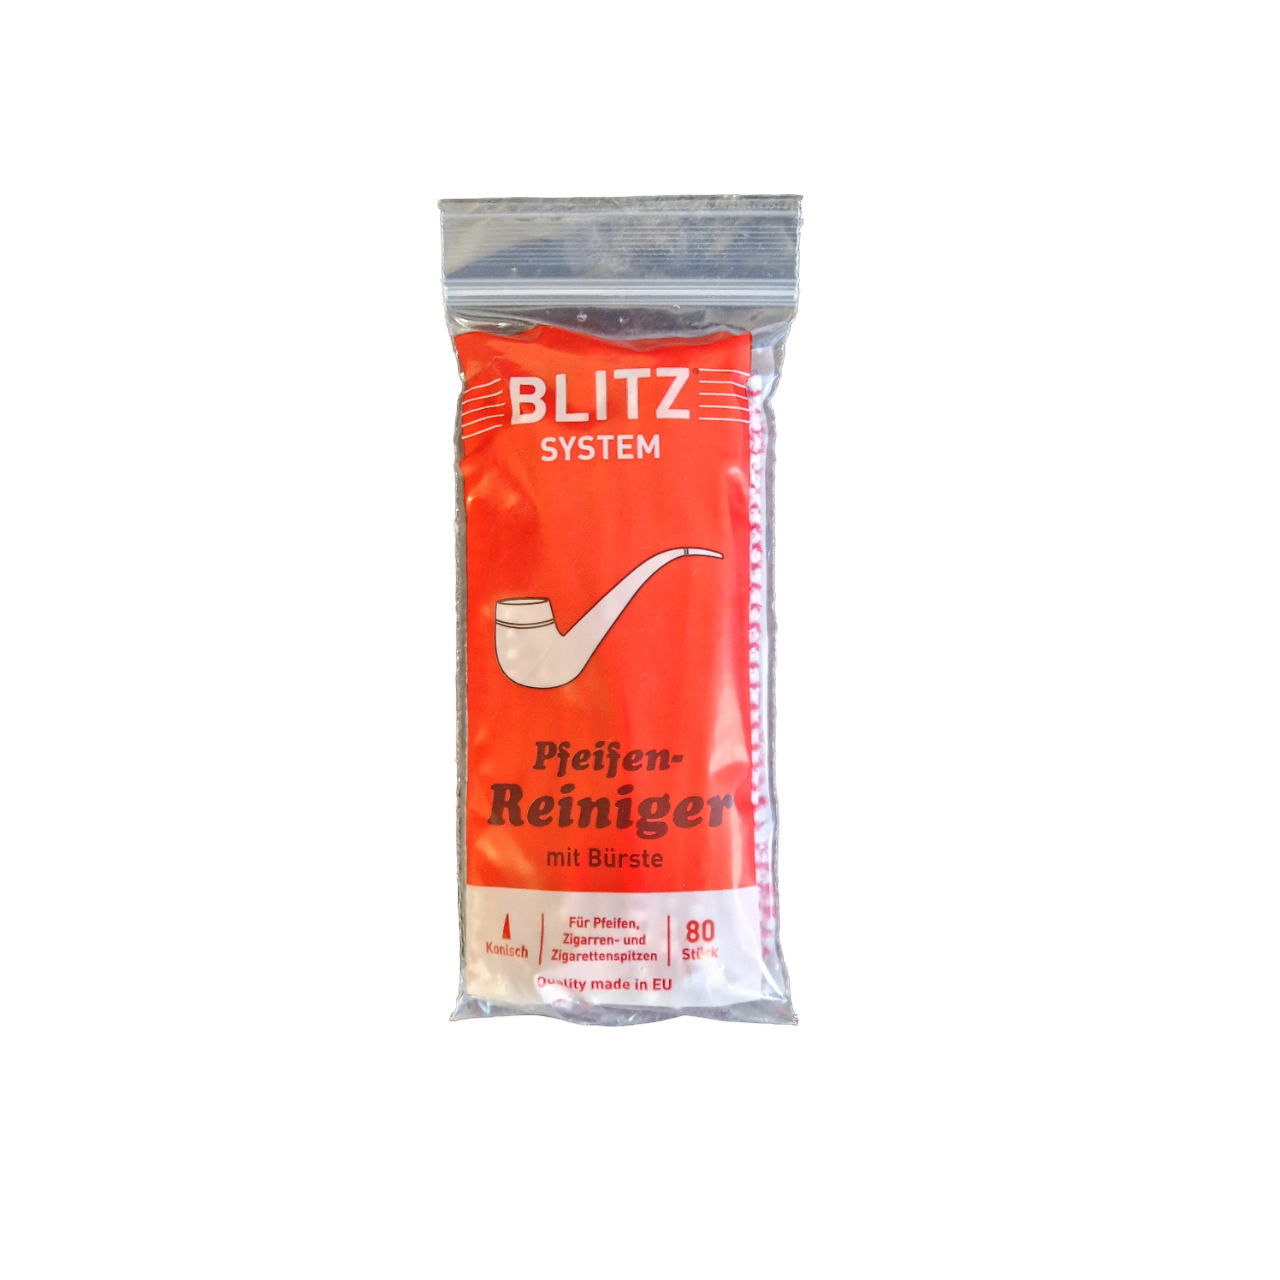 Pipe cleaner Blitz, red-white, bag of 80 pieces